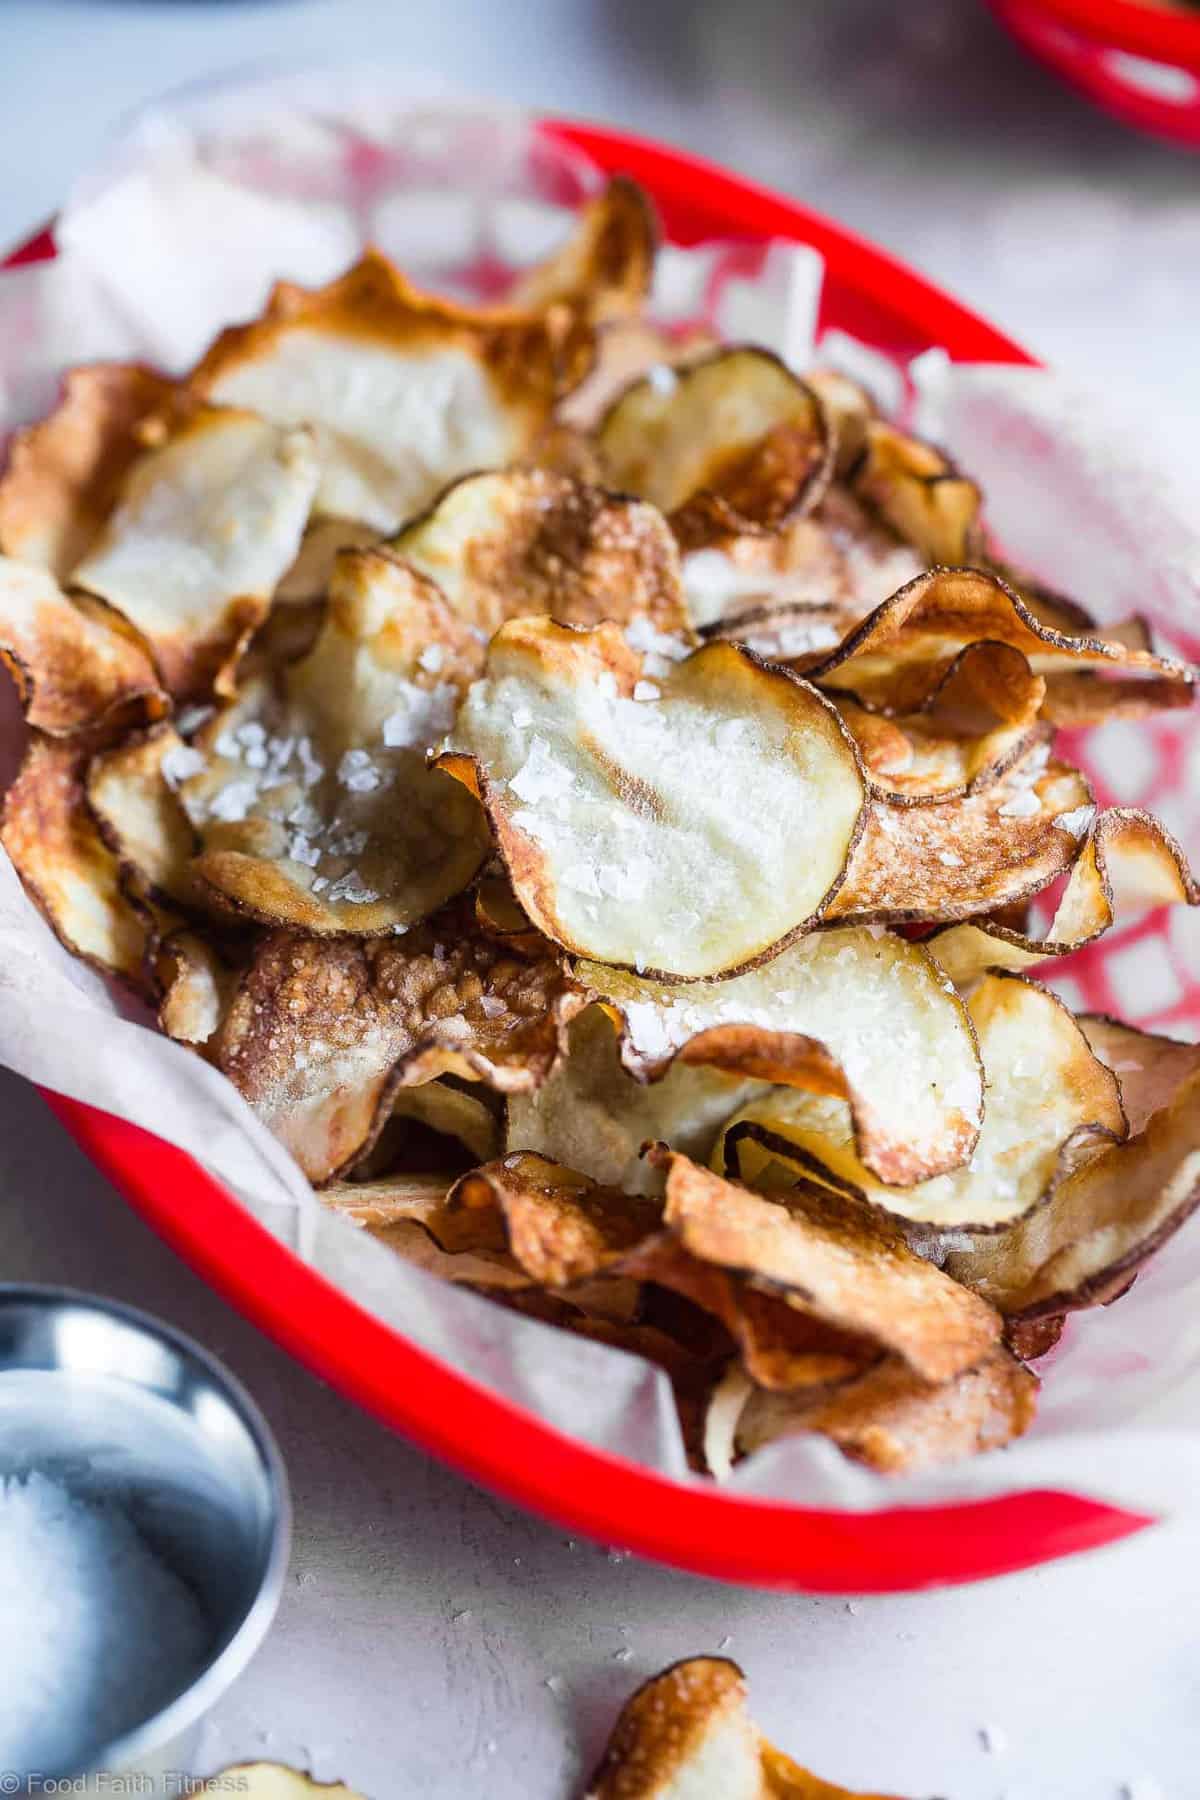 Air Fryer Potato Chips - These EASY Air Fryer Potato Chips are perfectly crispy and crunchy and only use 2 ingredients! You'll never believe they are healthy, vegan, gluten free and only 75 calories for a large serving! | #Foodfaithfitness | #Glutenfree #Airfryer #Healthy #Vegan #CleanEating